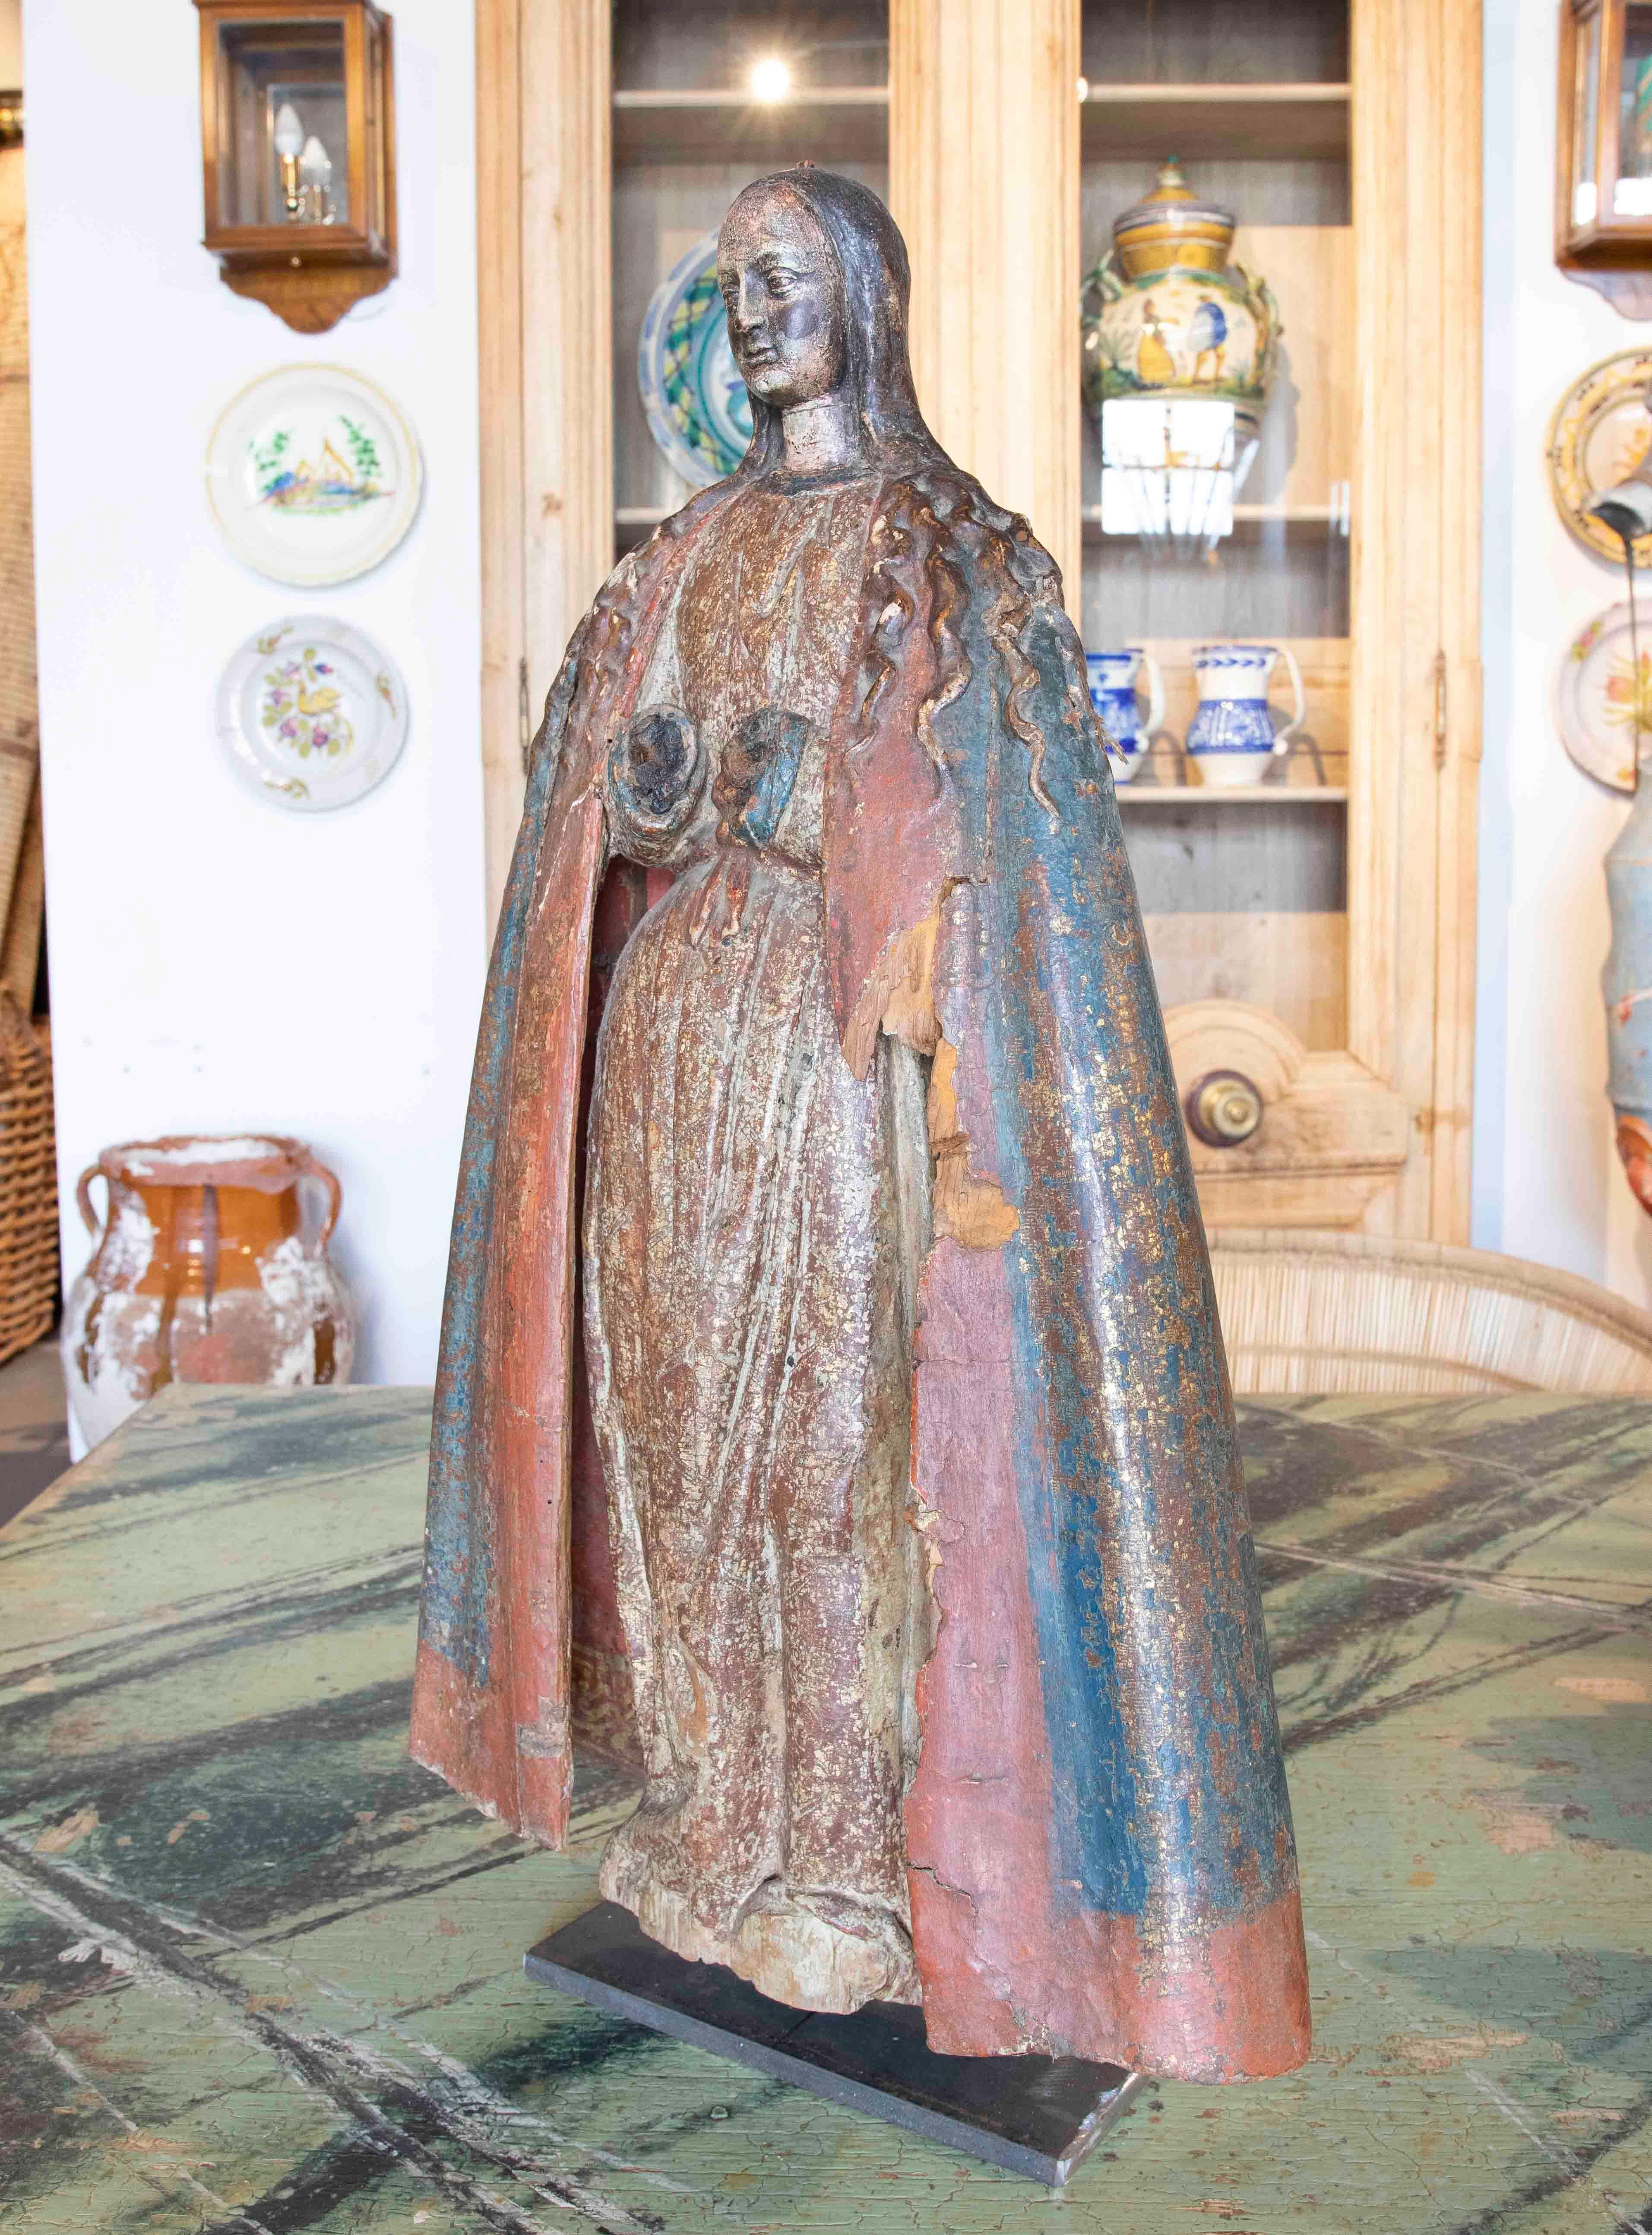 17th century Spanish Polychromed Wooden Carved Sculpture of a Virgin Mary.